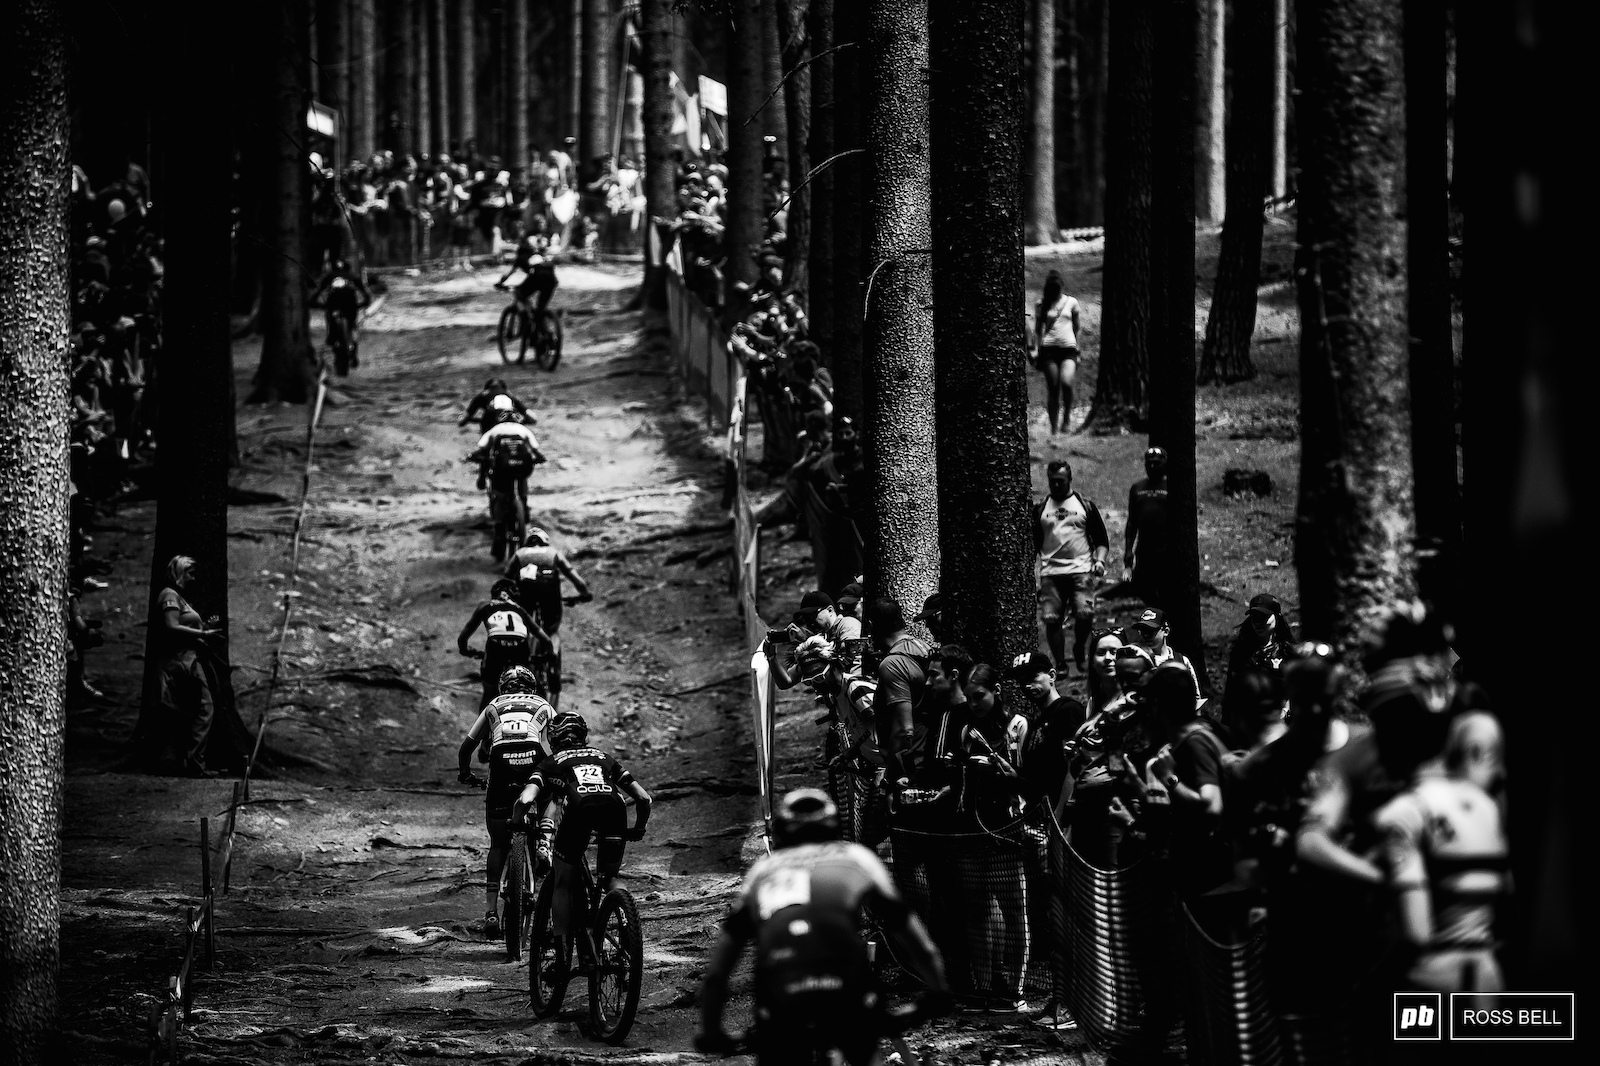 The classic climb of Nove Mesto was lined with fans once again.